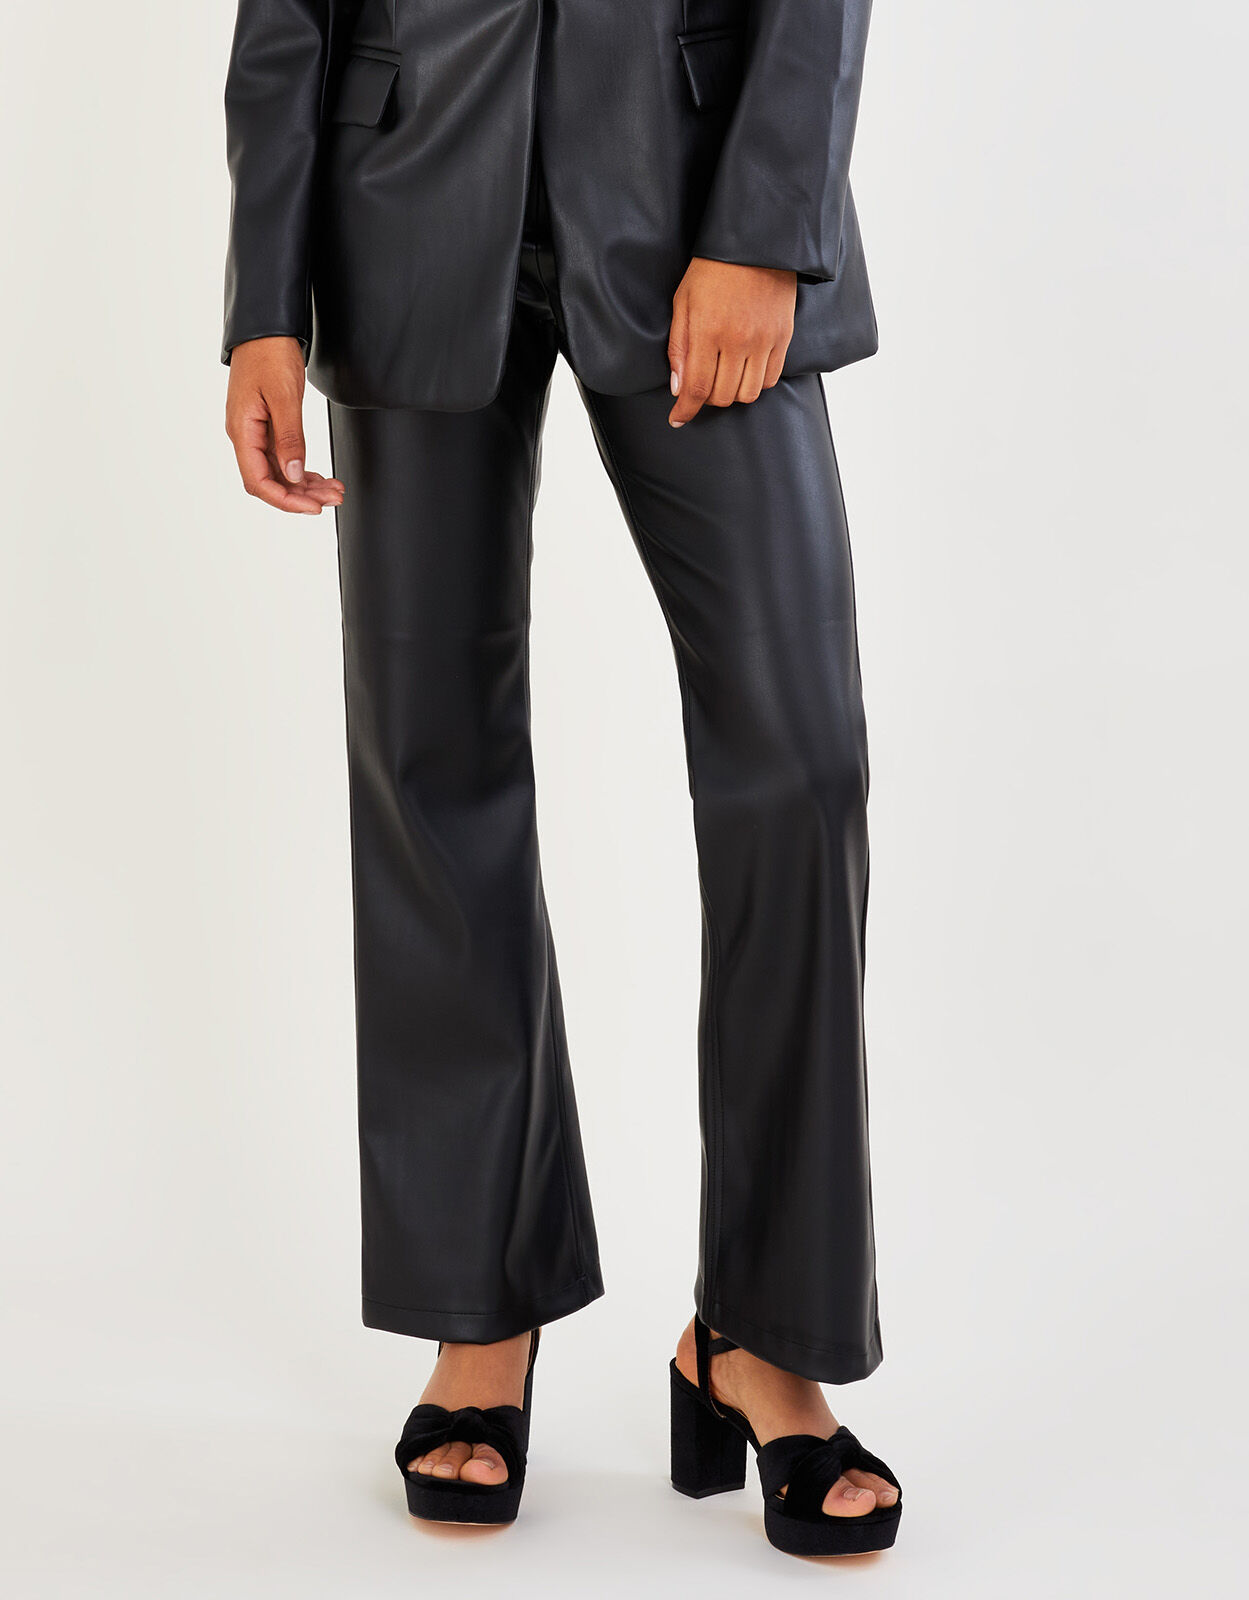 Helmut Lang Tailored Bootcut Trousers - Farfetch